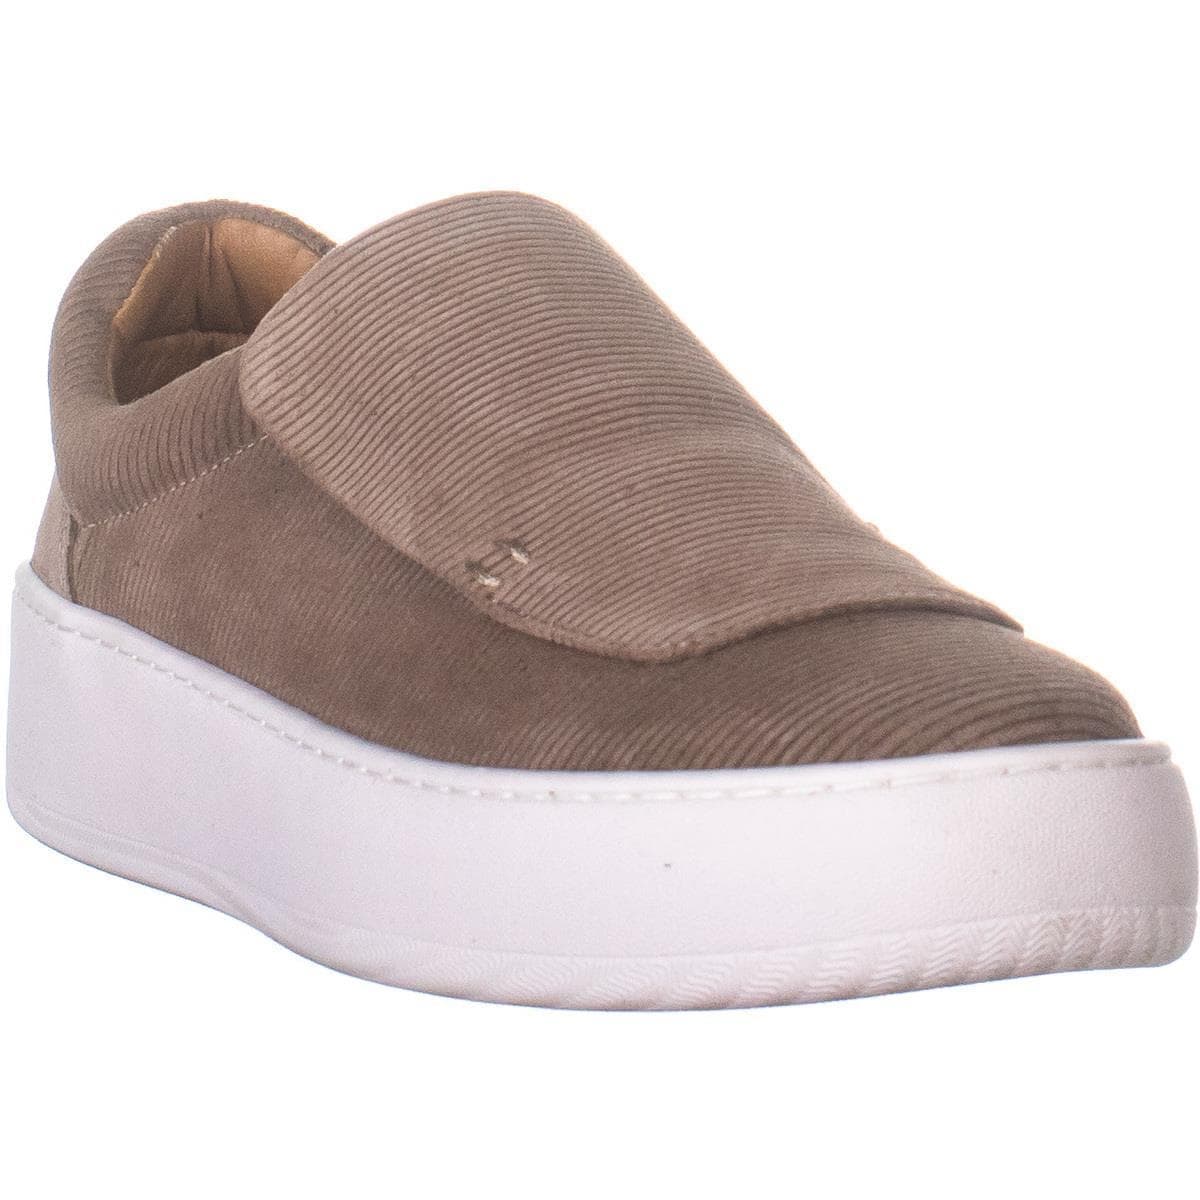 taupe suede slip on sneakers